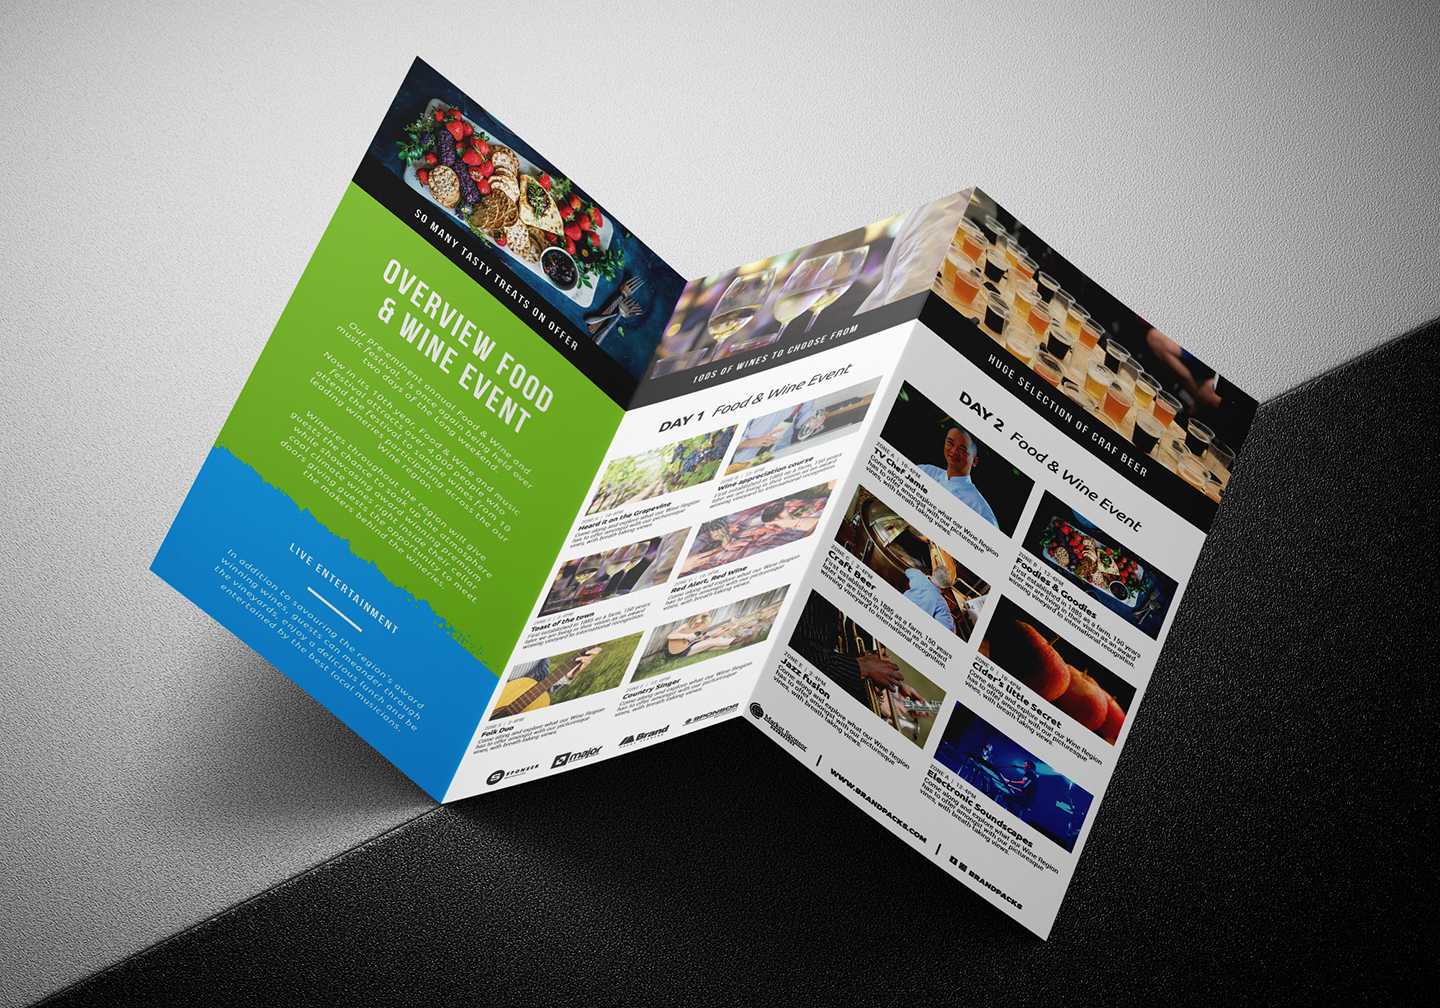 Free Tri Fold Brochure Template For Events & Festivals – Psd With Regard To Adobe Illustrator Tri Fold Brochure Template